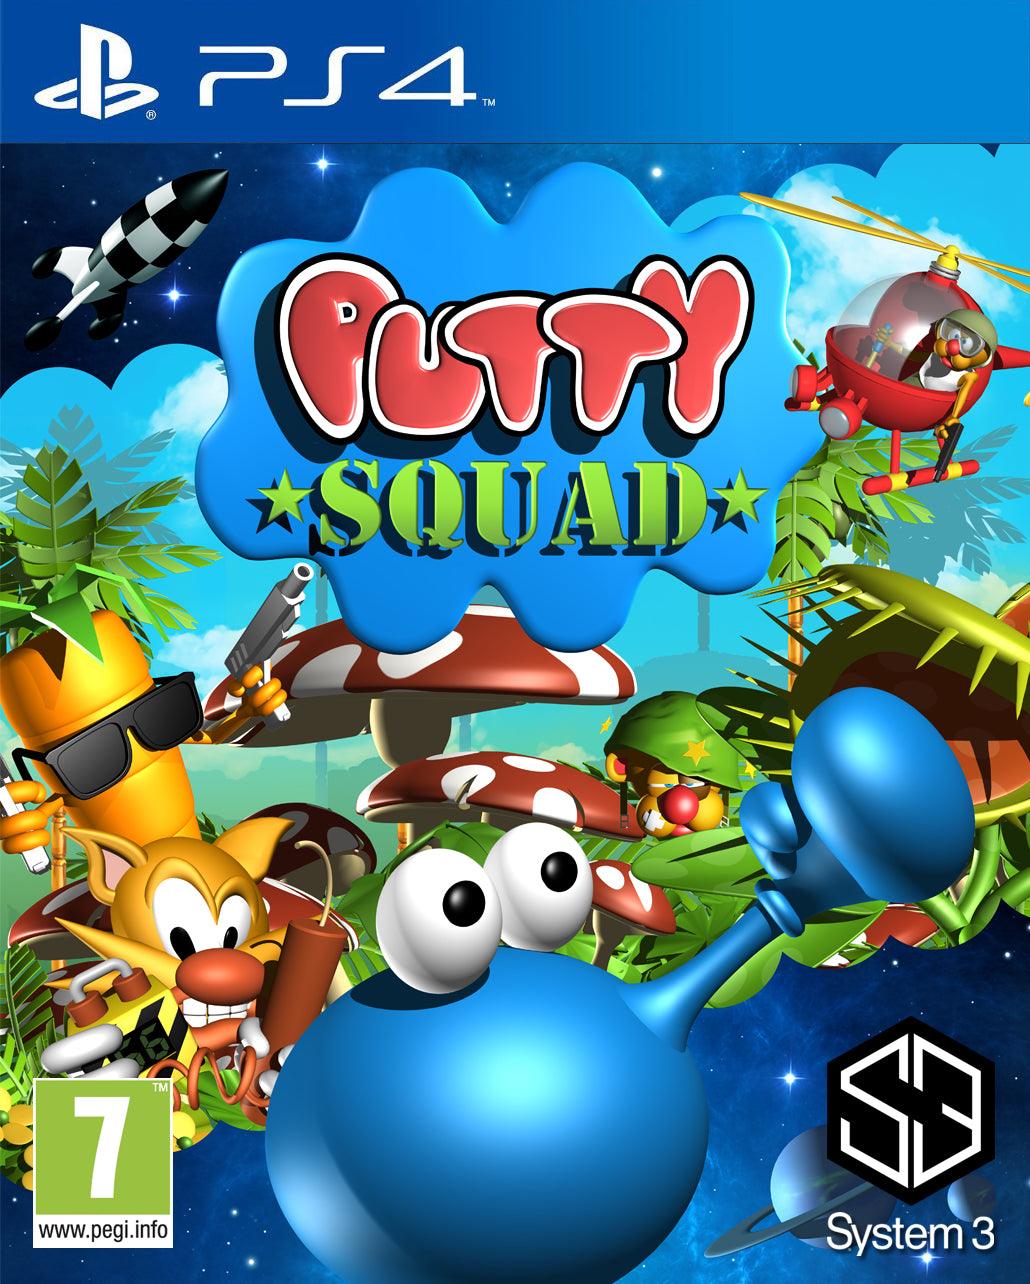 Putty Squad - Want a New Gadget